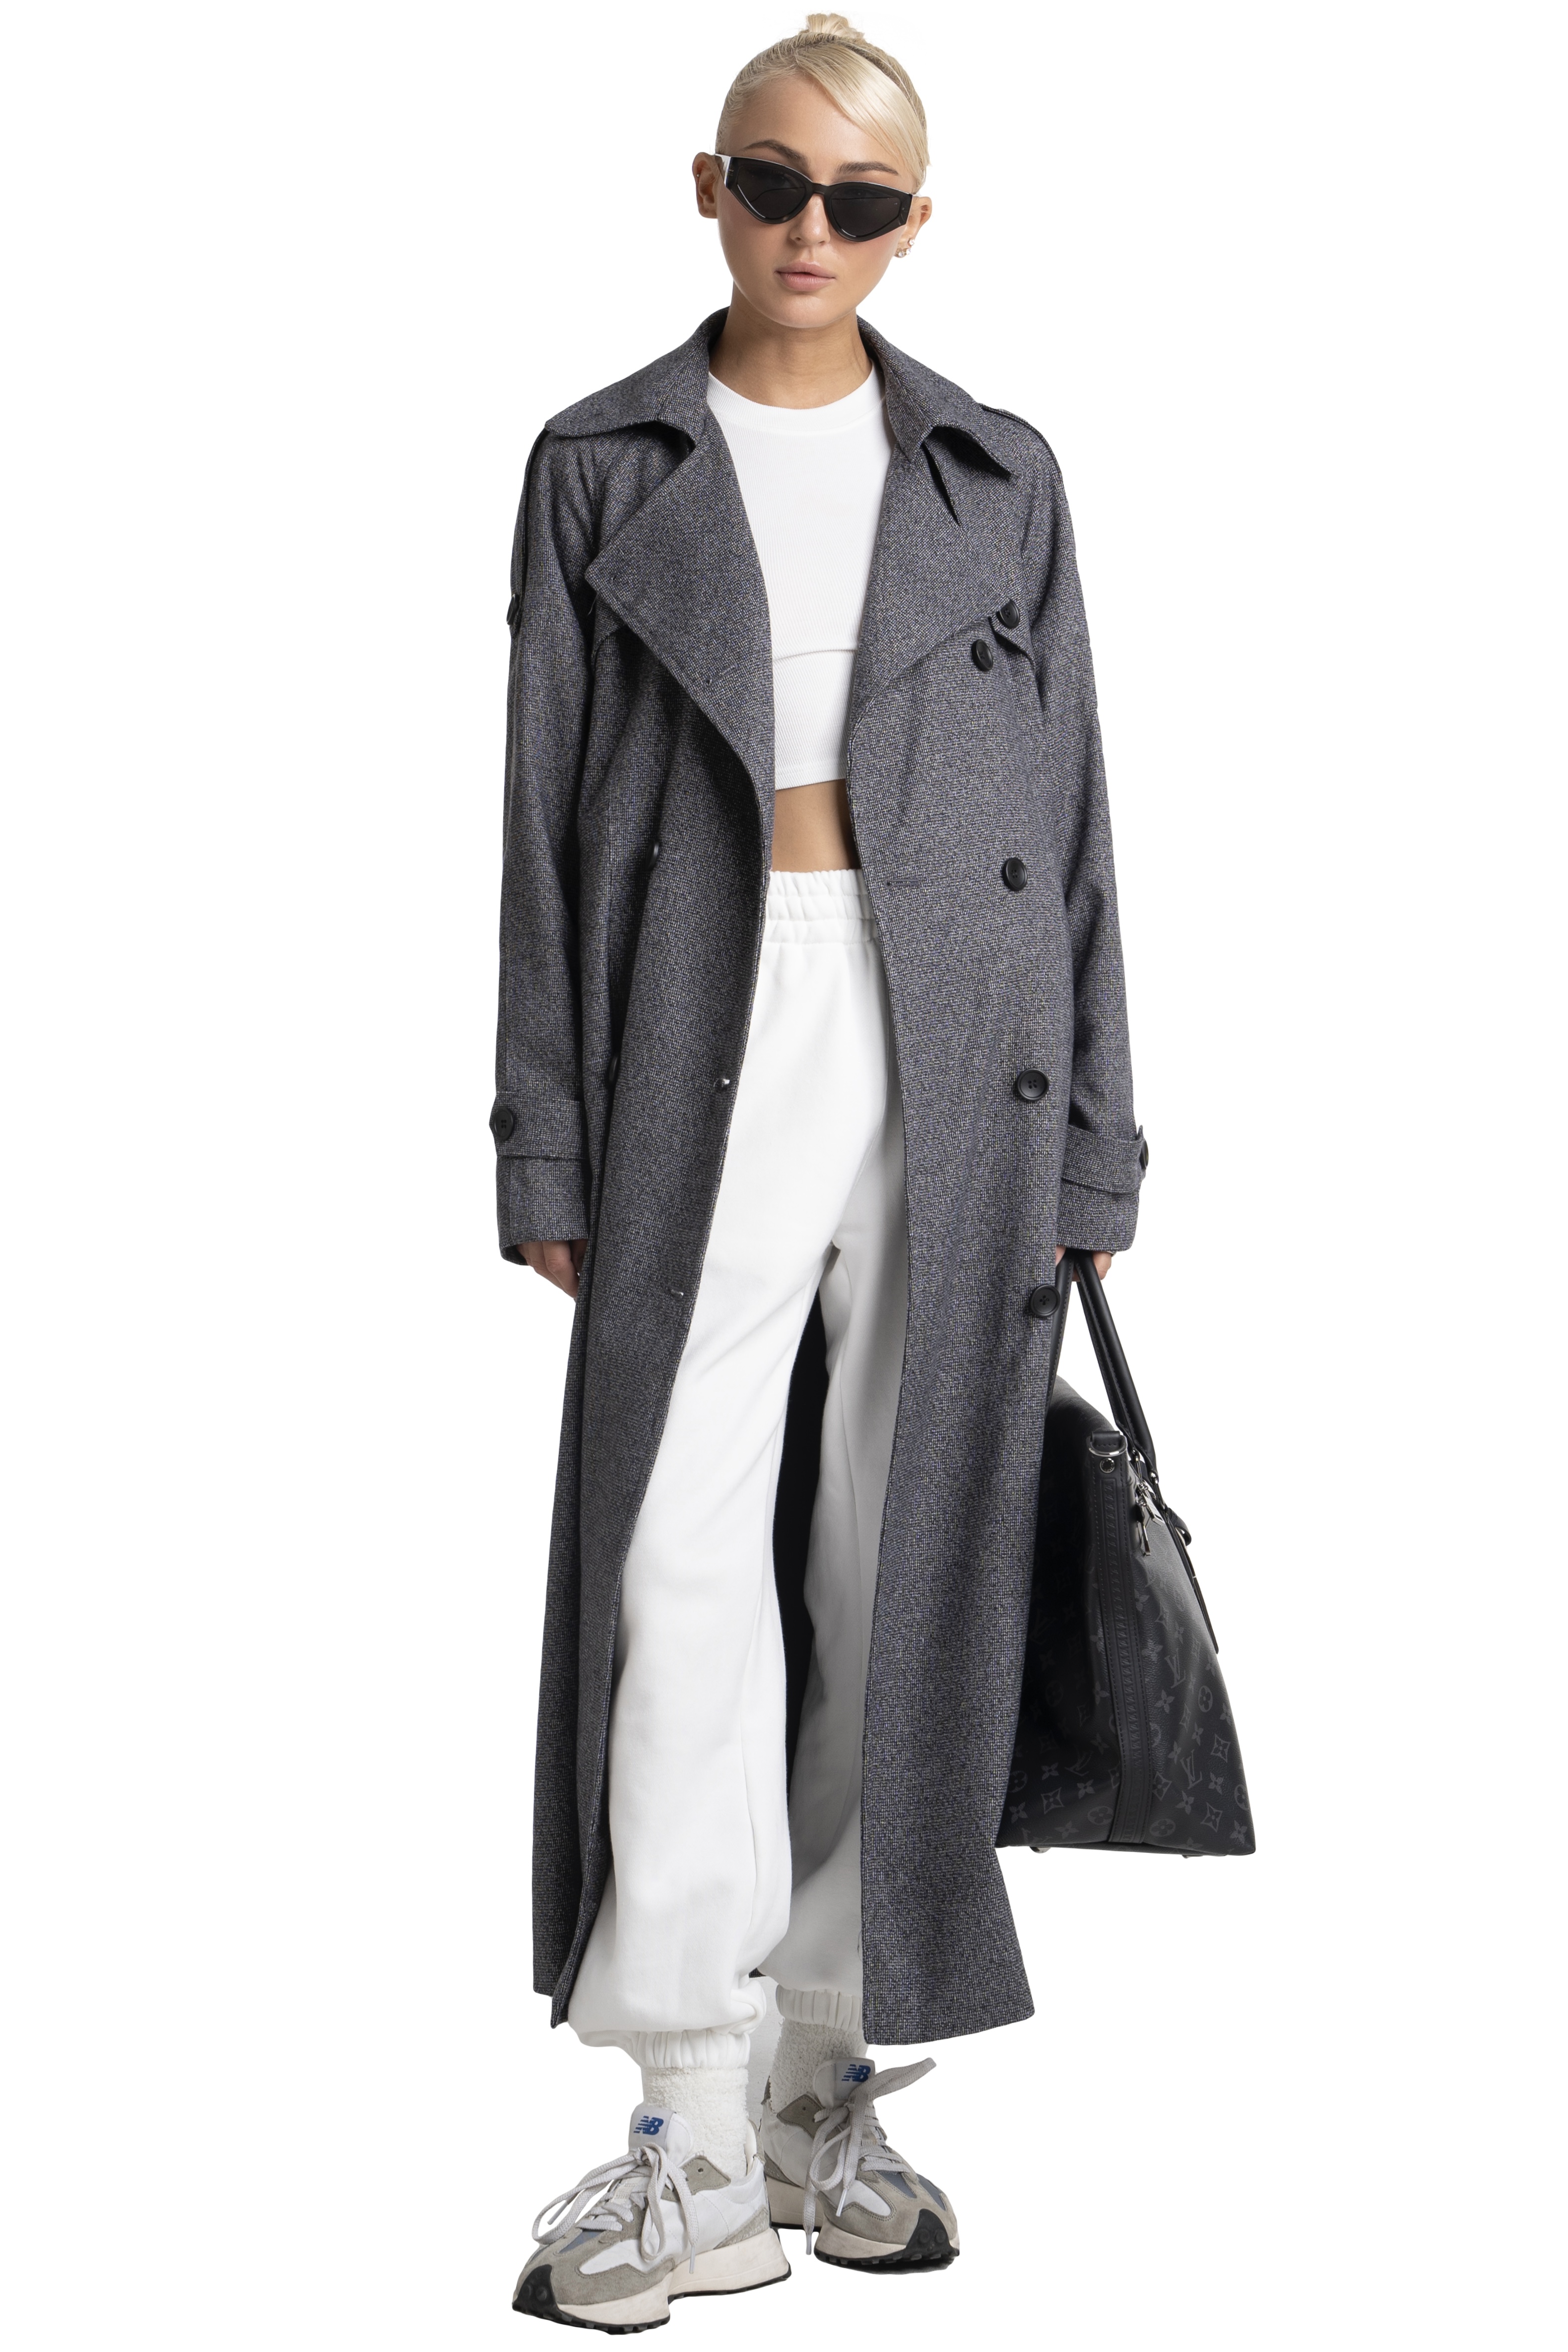 OLLY BELTED TRENCH COAT - GREY PIN CHECK